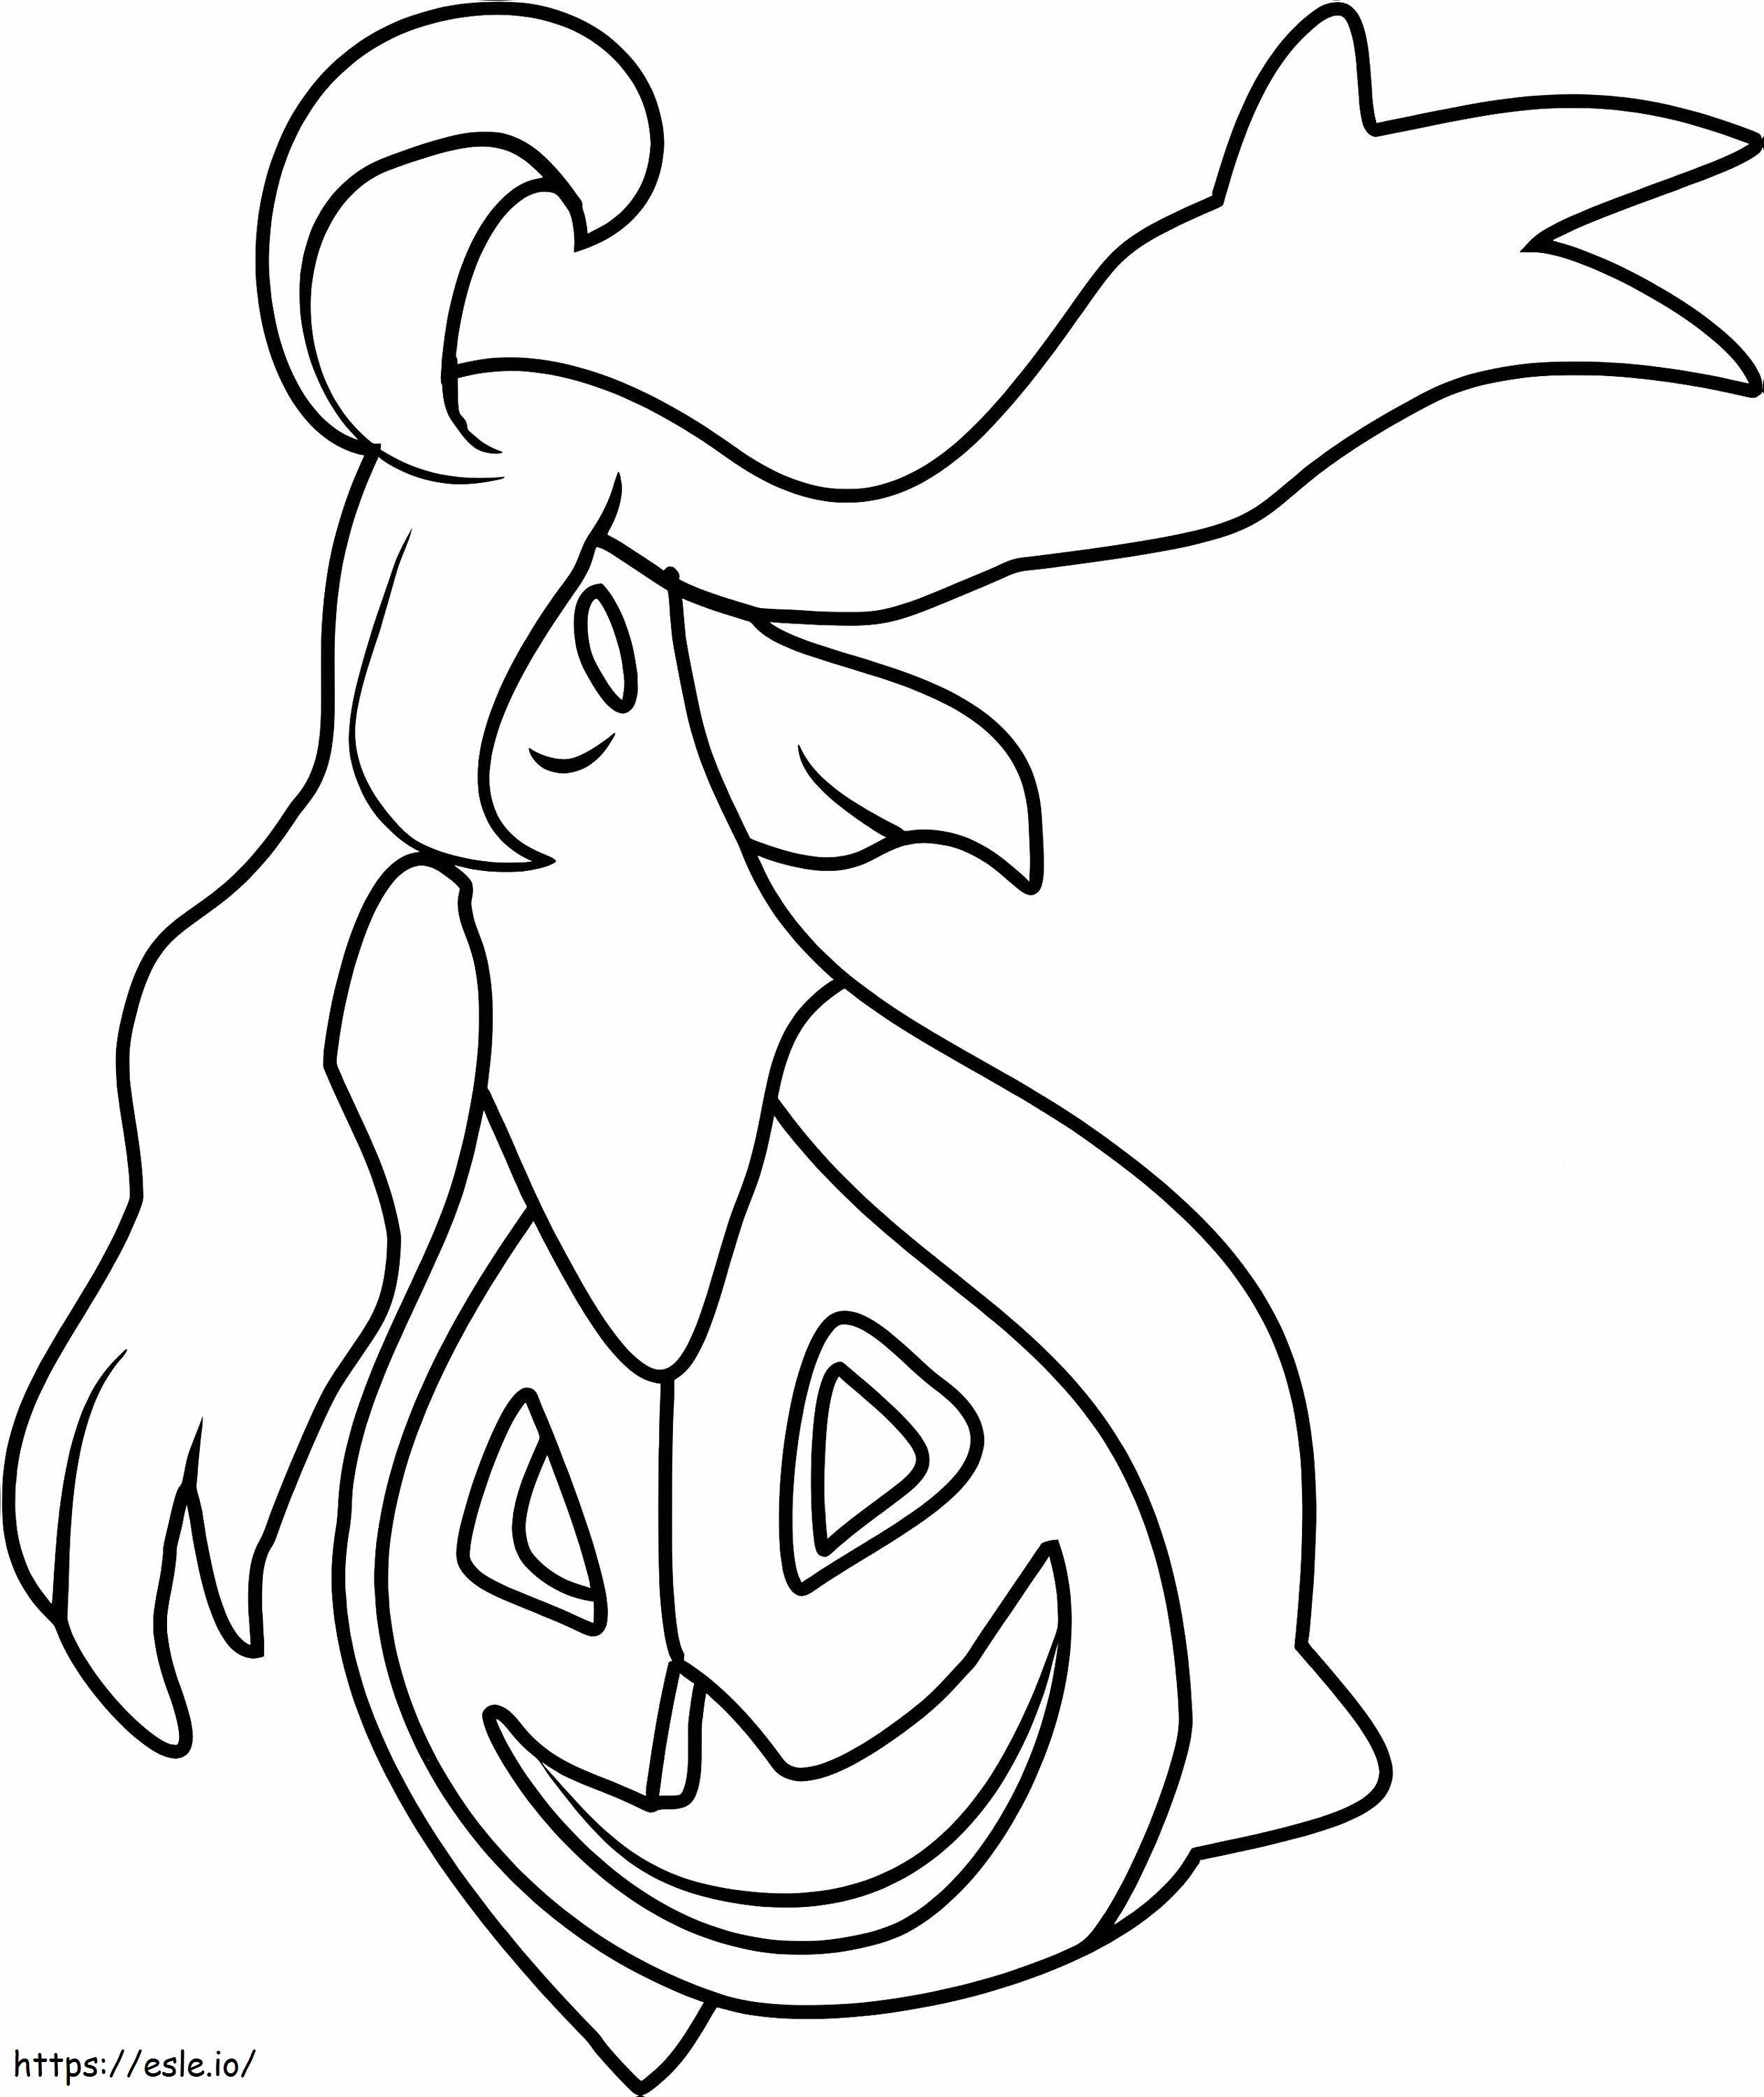 Gourgeist Pokemon coloring page